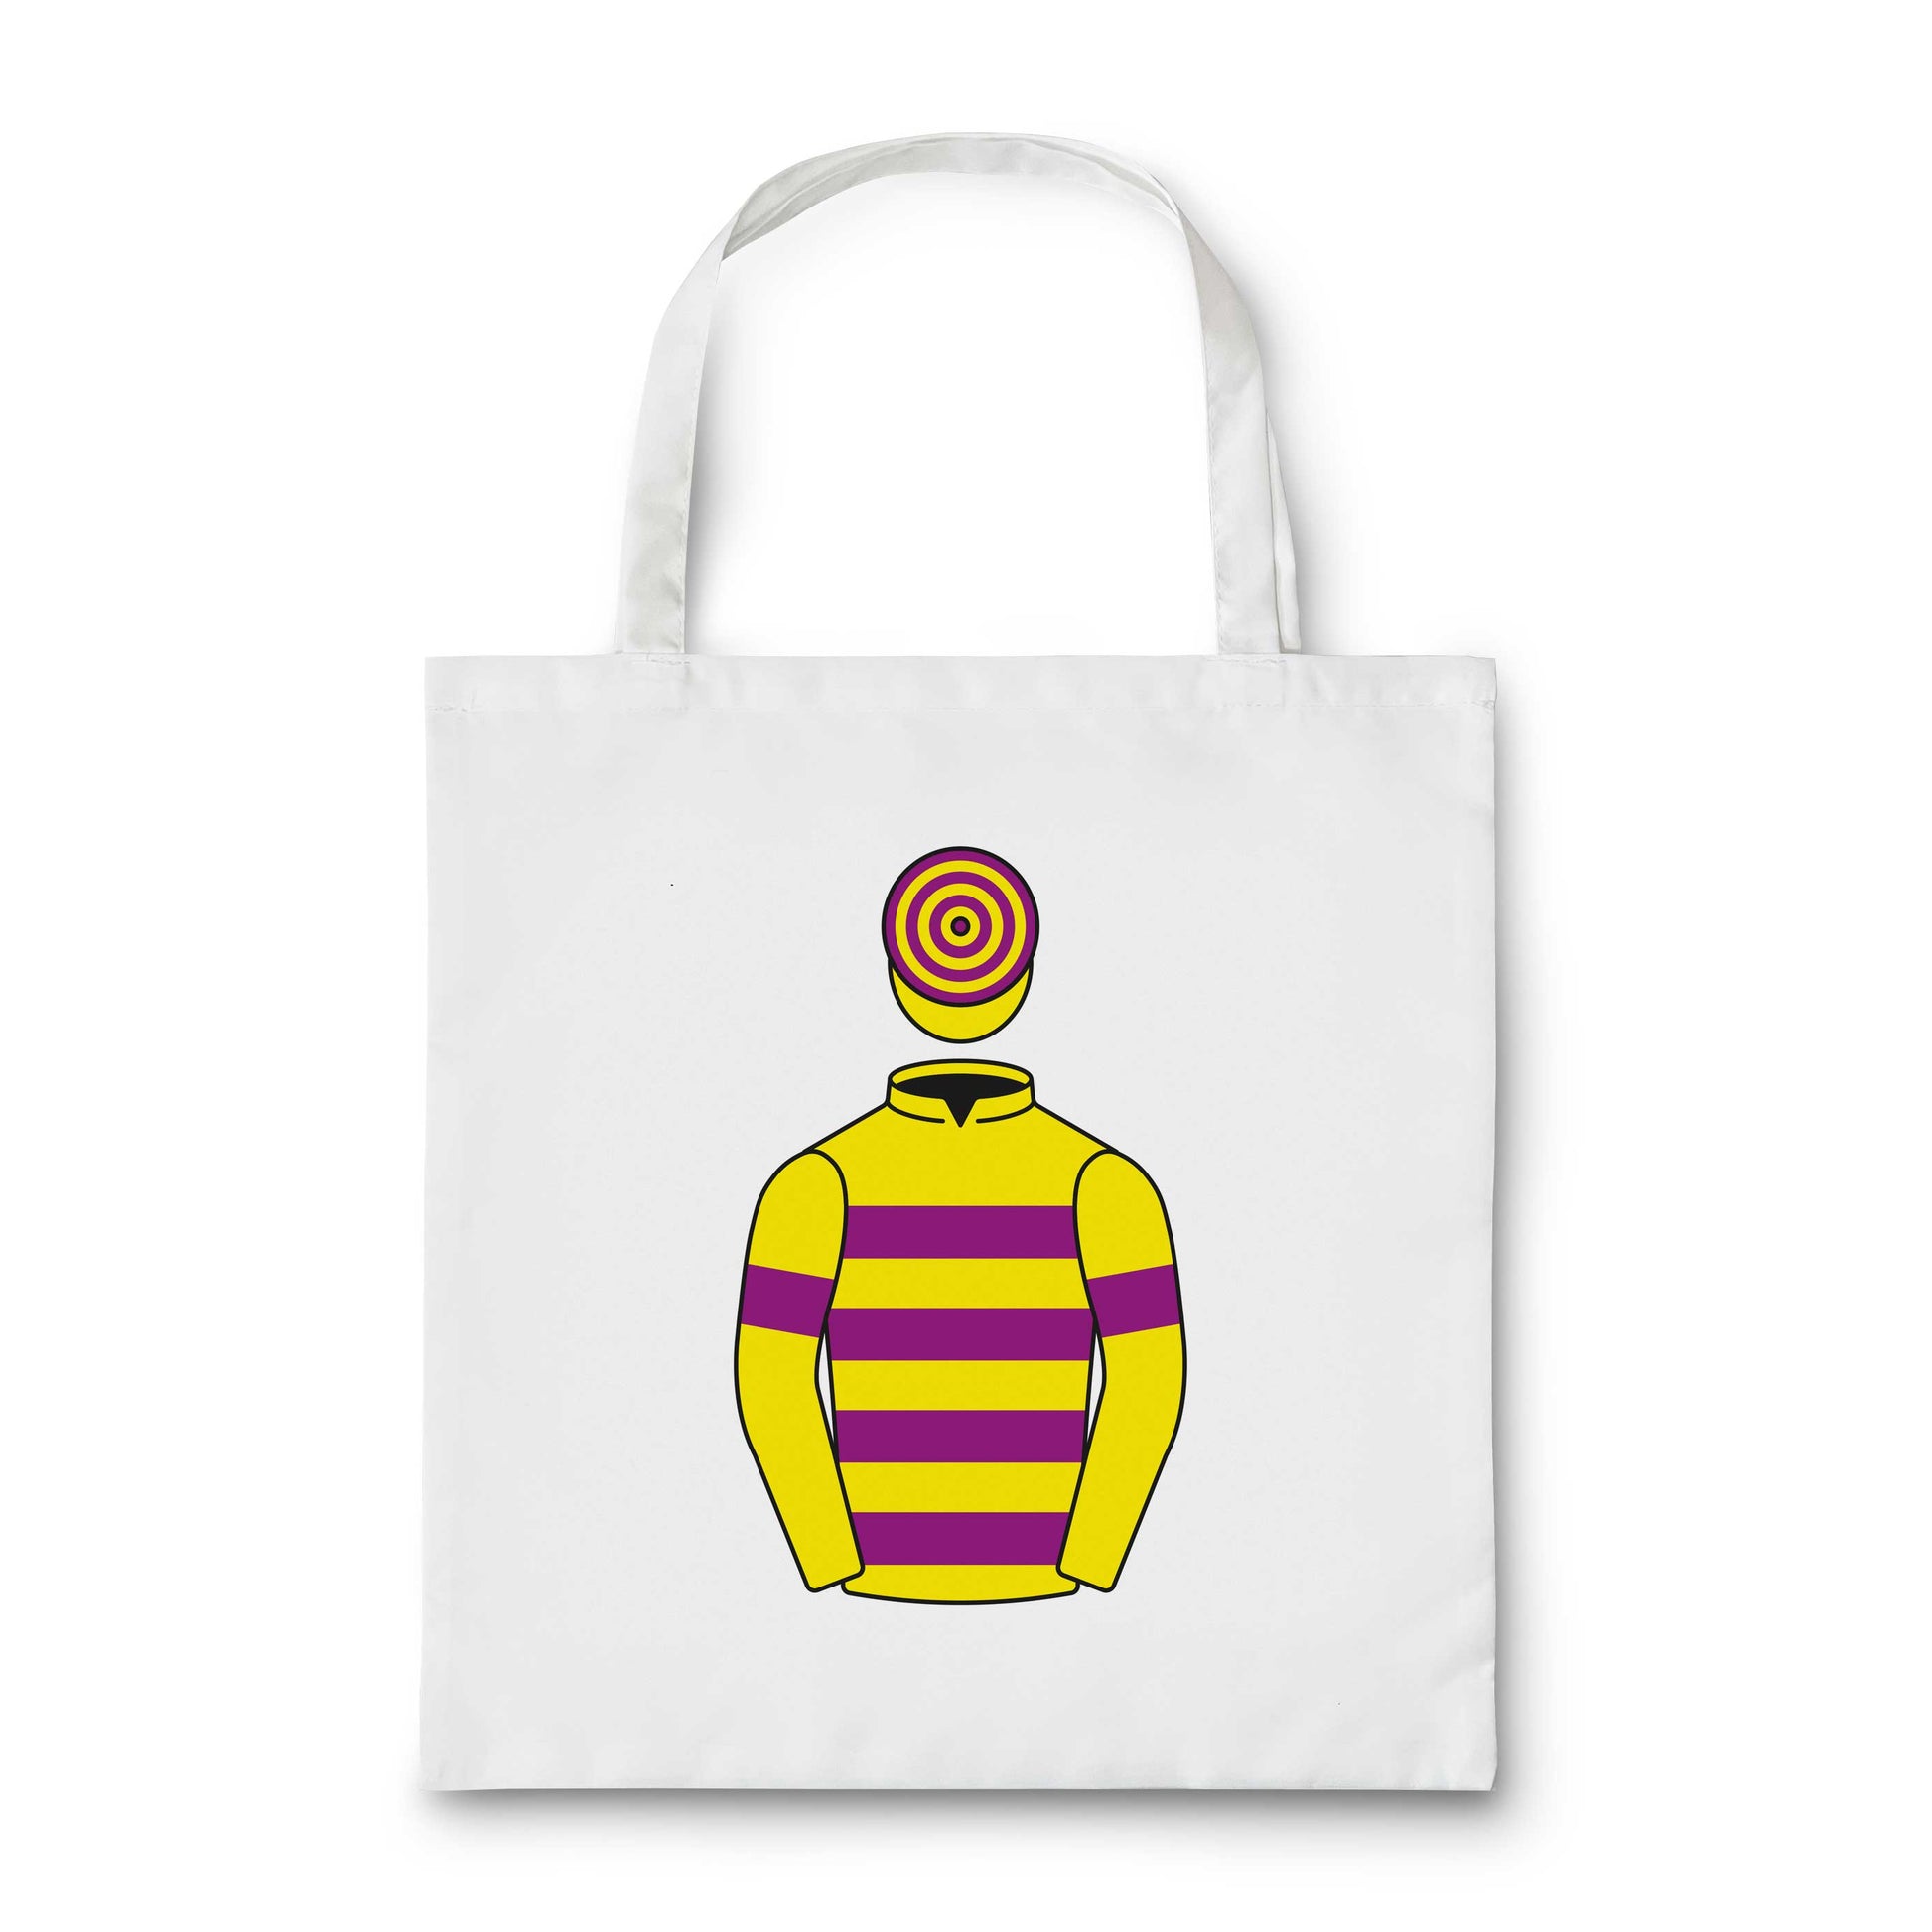 Mr And Mrs J D Cotton Tote Bag - Tote Bag - Hacked Up